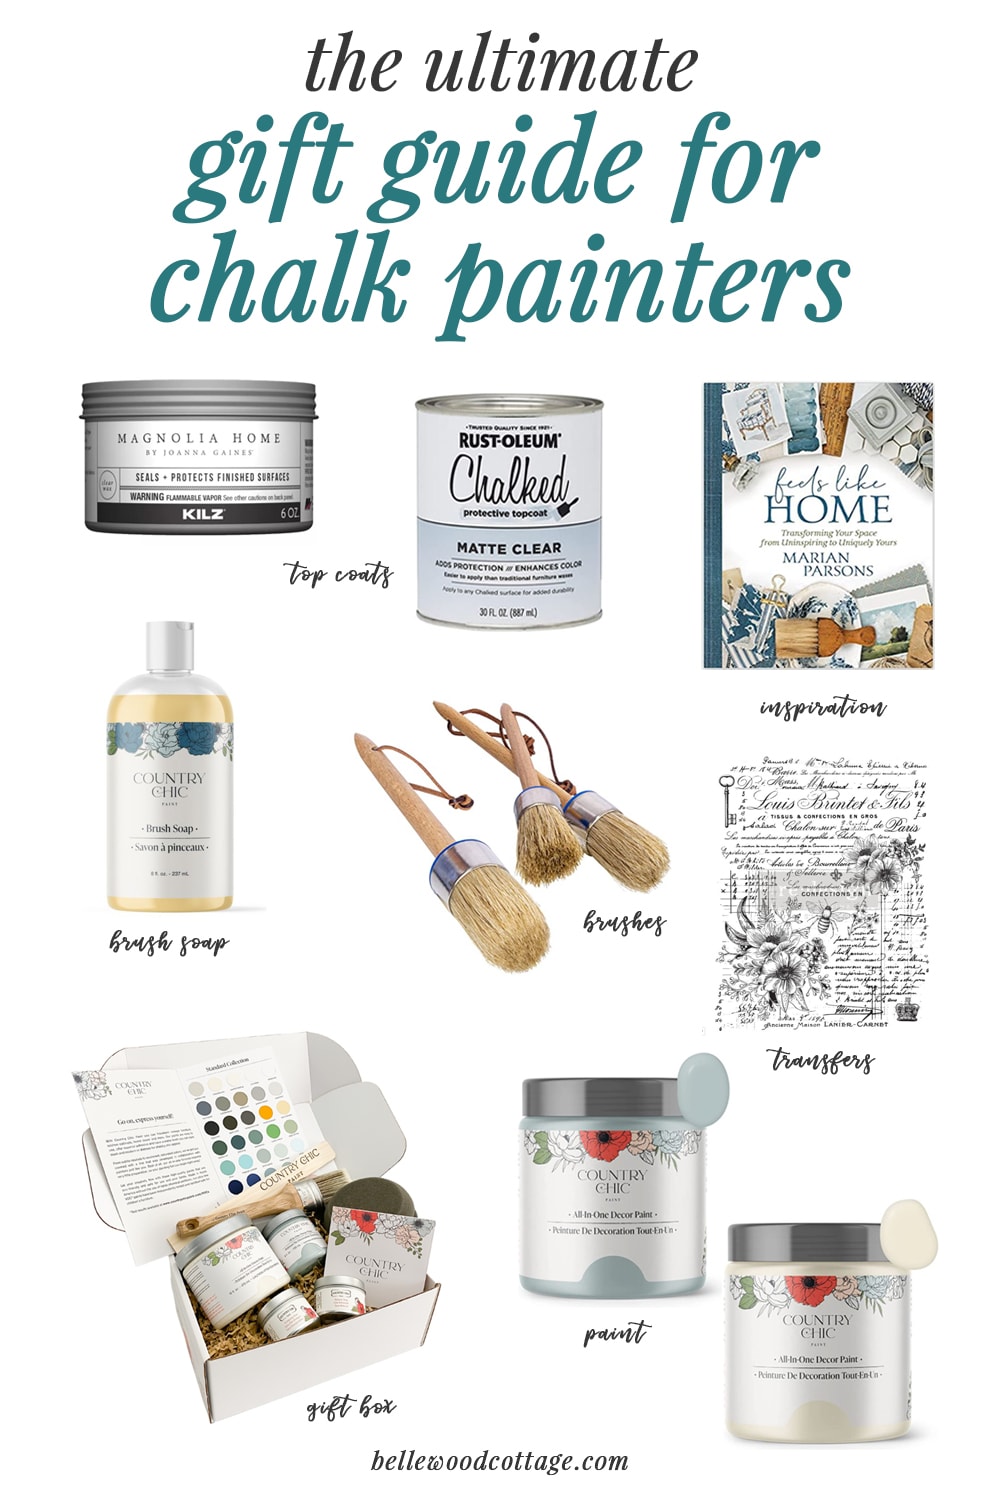 A collage of various chalk painting products like brush soap, wax, transfers, and paint, labelled, with the words, "the Ultimate Gift Guide for Chalk Painters".